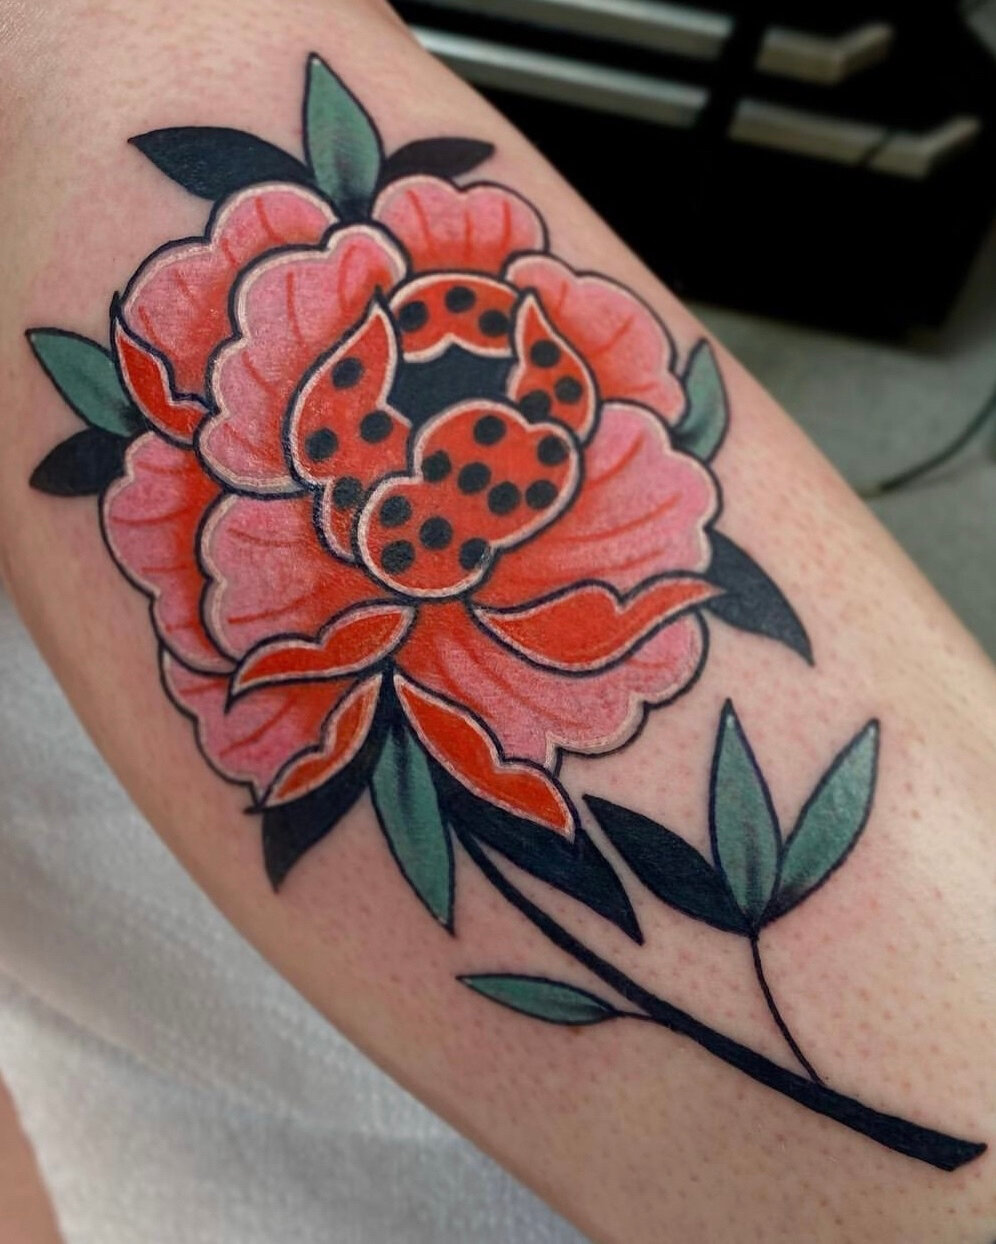 Super fun peony by colour queen @plattstatts 🥰 Contact Jess directly for May/June bookings! ​​​​​​​​​.
.
#threekingstattoo #3KLDN #threekingslondon #3K #tattoo #tattooing #london #deptford #brockley #southlondon #newcross #se8 #tattooartist #tattoos